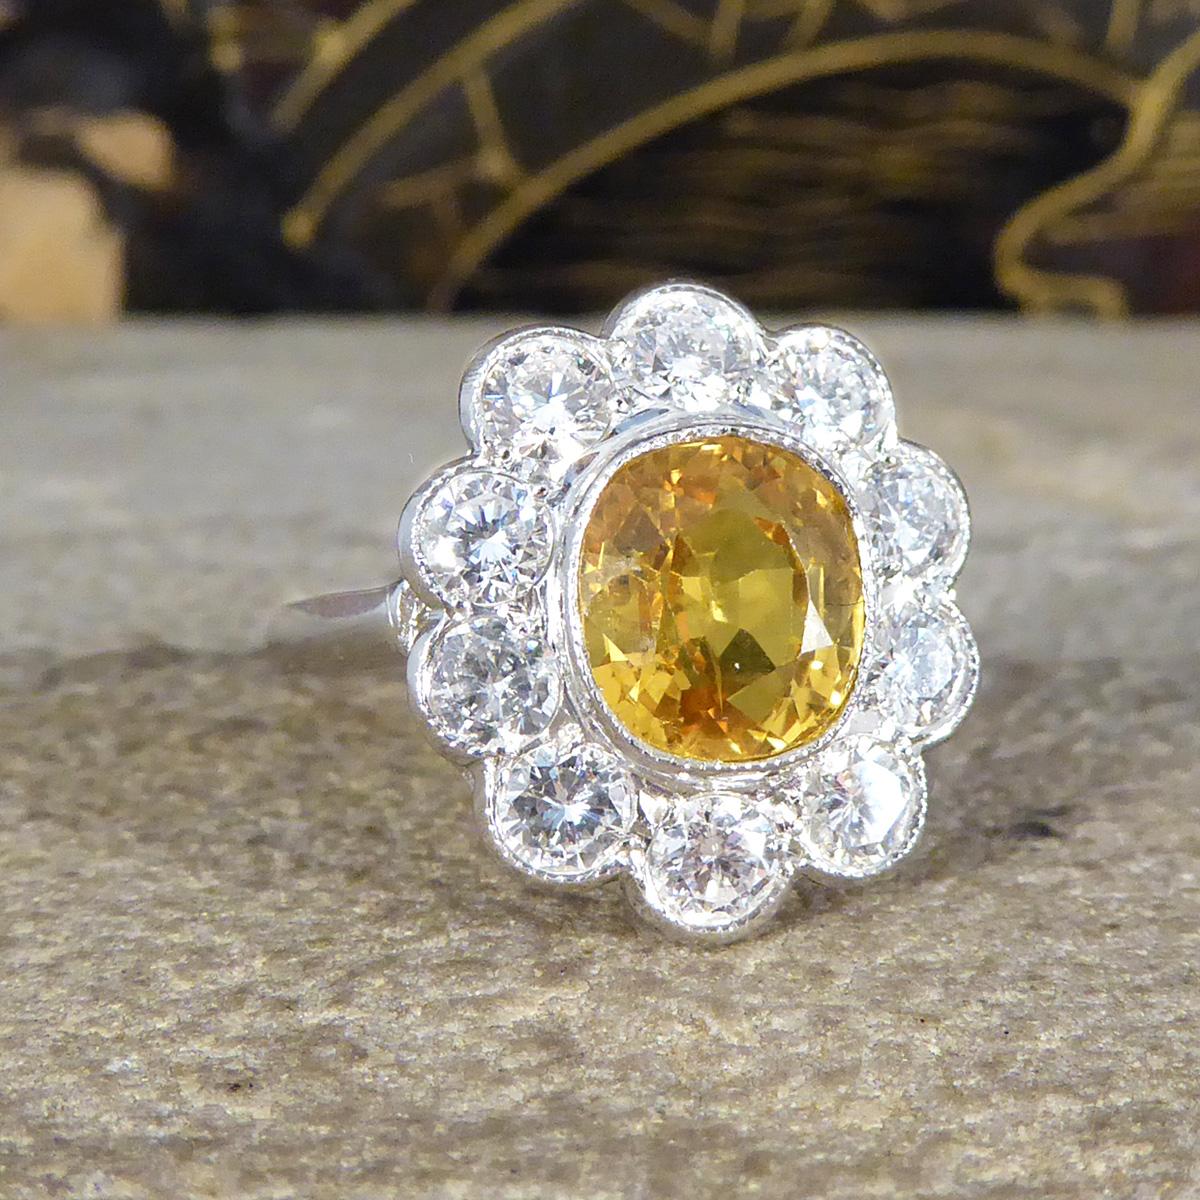 This beautiful Yellow Sapphire and Diamond cluster ring would make the perfect engagement or statement ring for anyone that likes a burst of colour. It has been crafted to reflect a sought after Edwardian style ring. Featuring a single 2.90ct